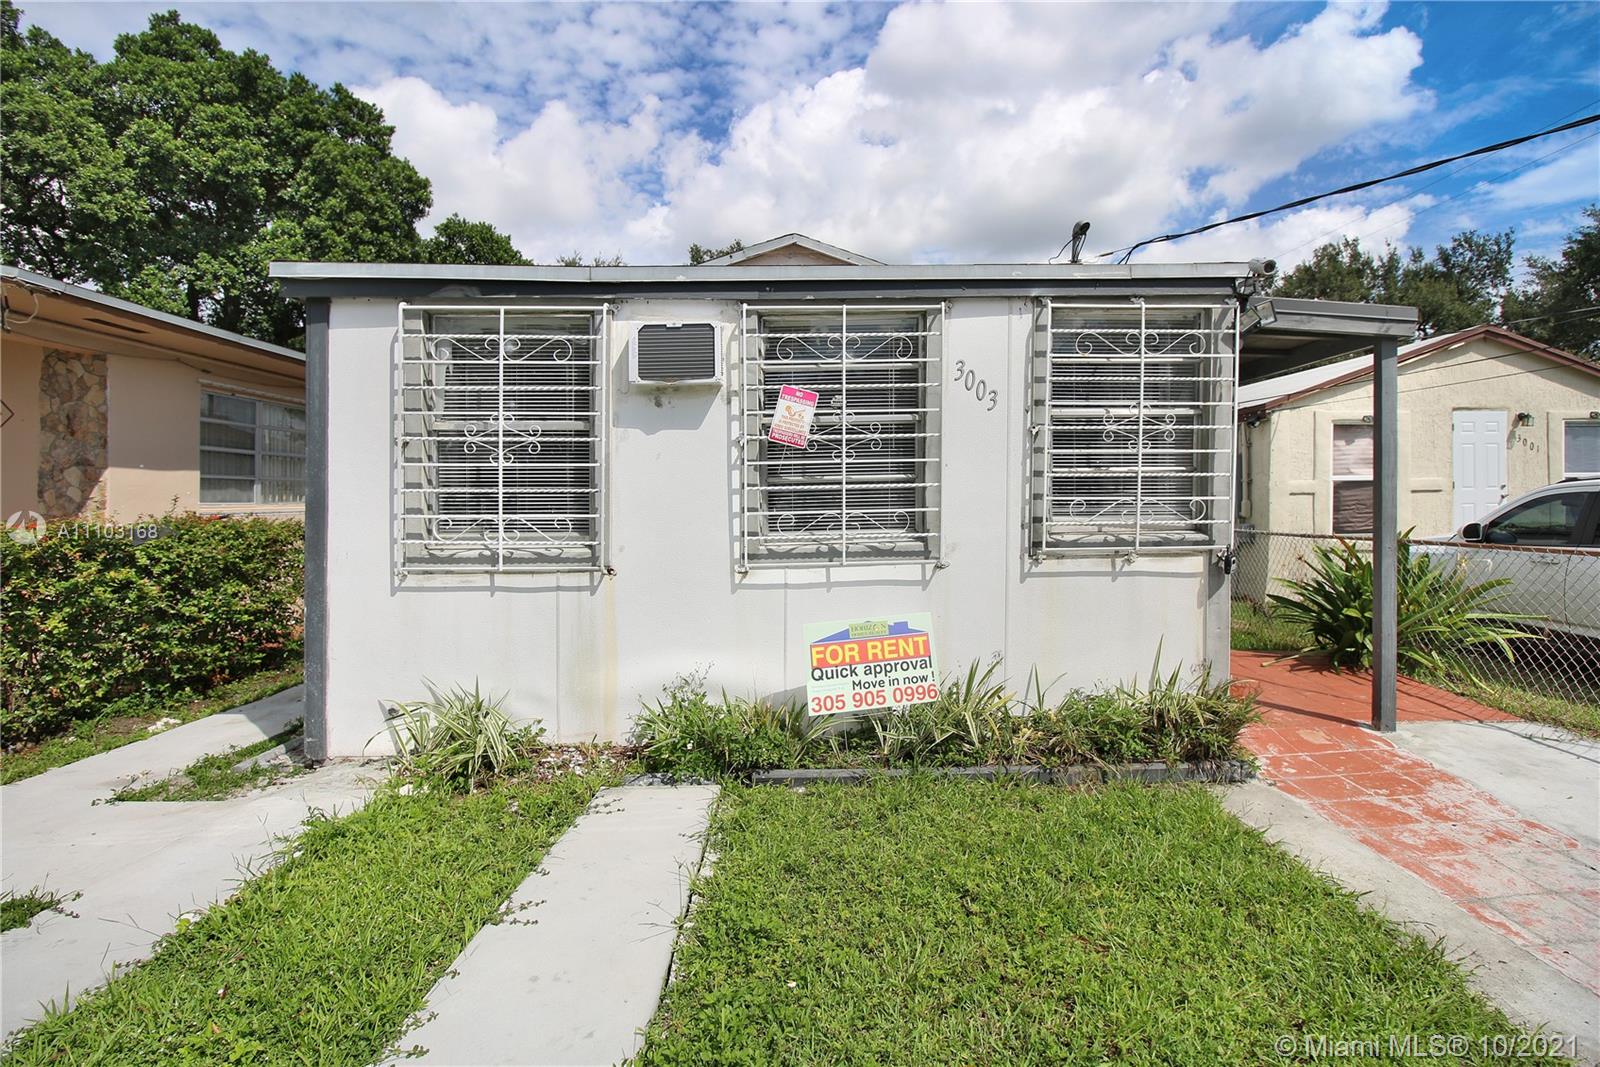 3003 NW 45th St, Miami, Florida 33142, 2 Bedrooms Bedrooms, ,2 BathroomsBathrooms,Residential,For Sale,3003 NW 45th St,A11103168